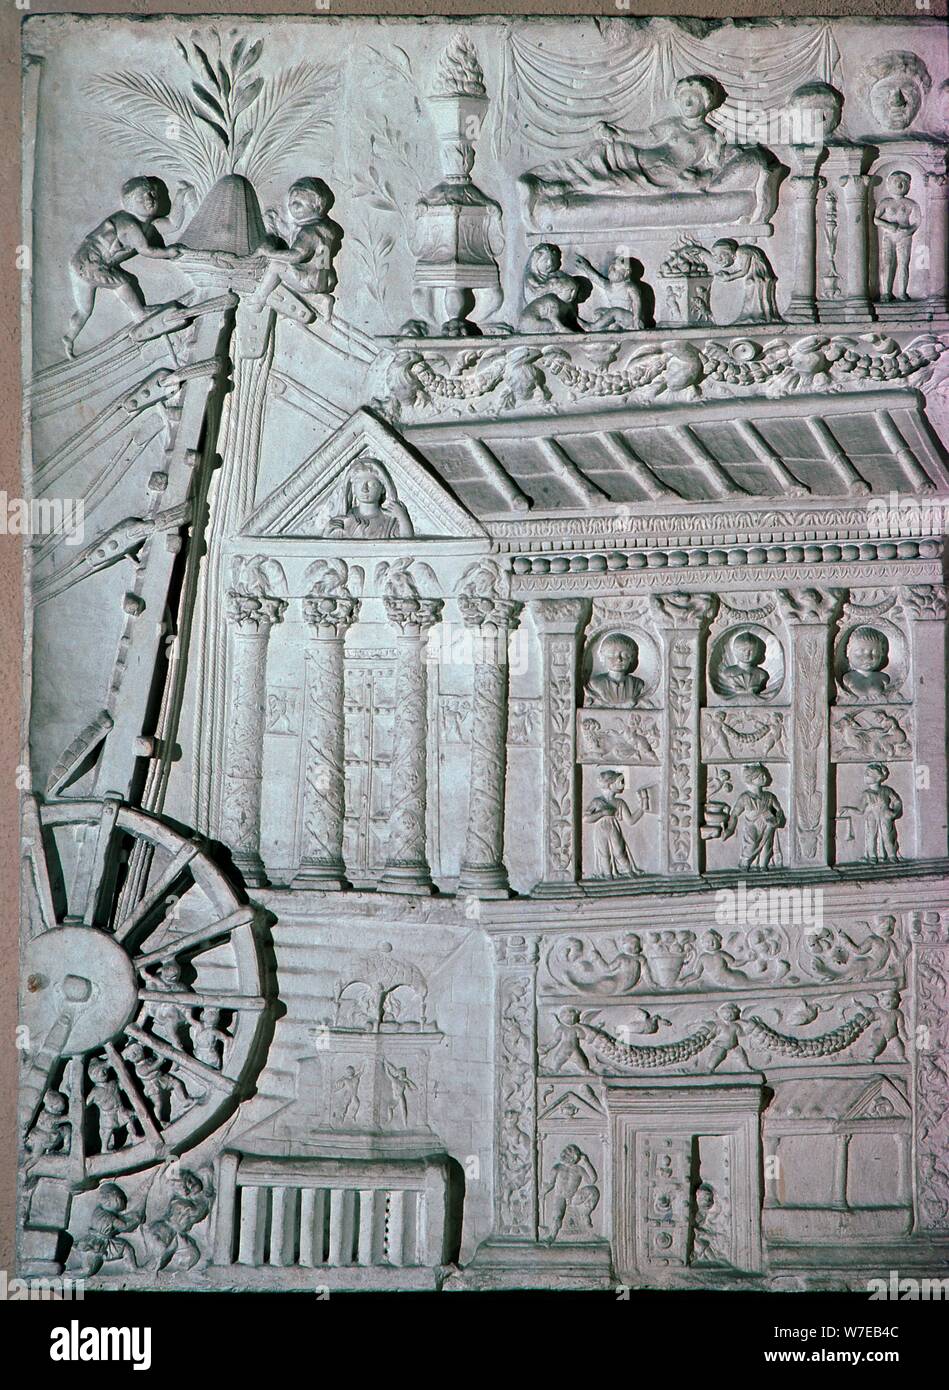 Roman relief of a crane being used. Artist: Unknown Stock Photo